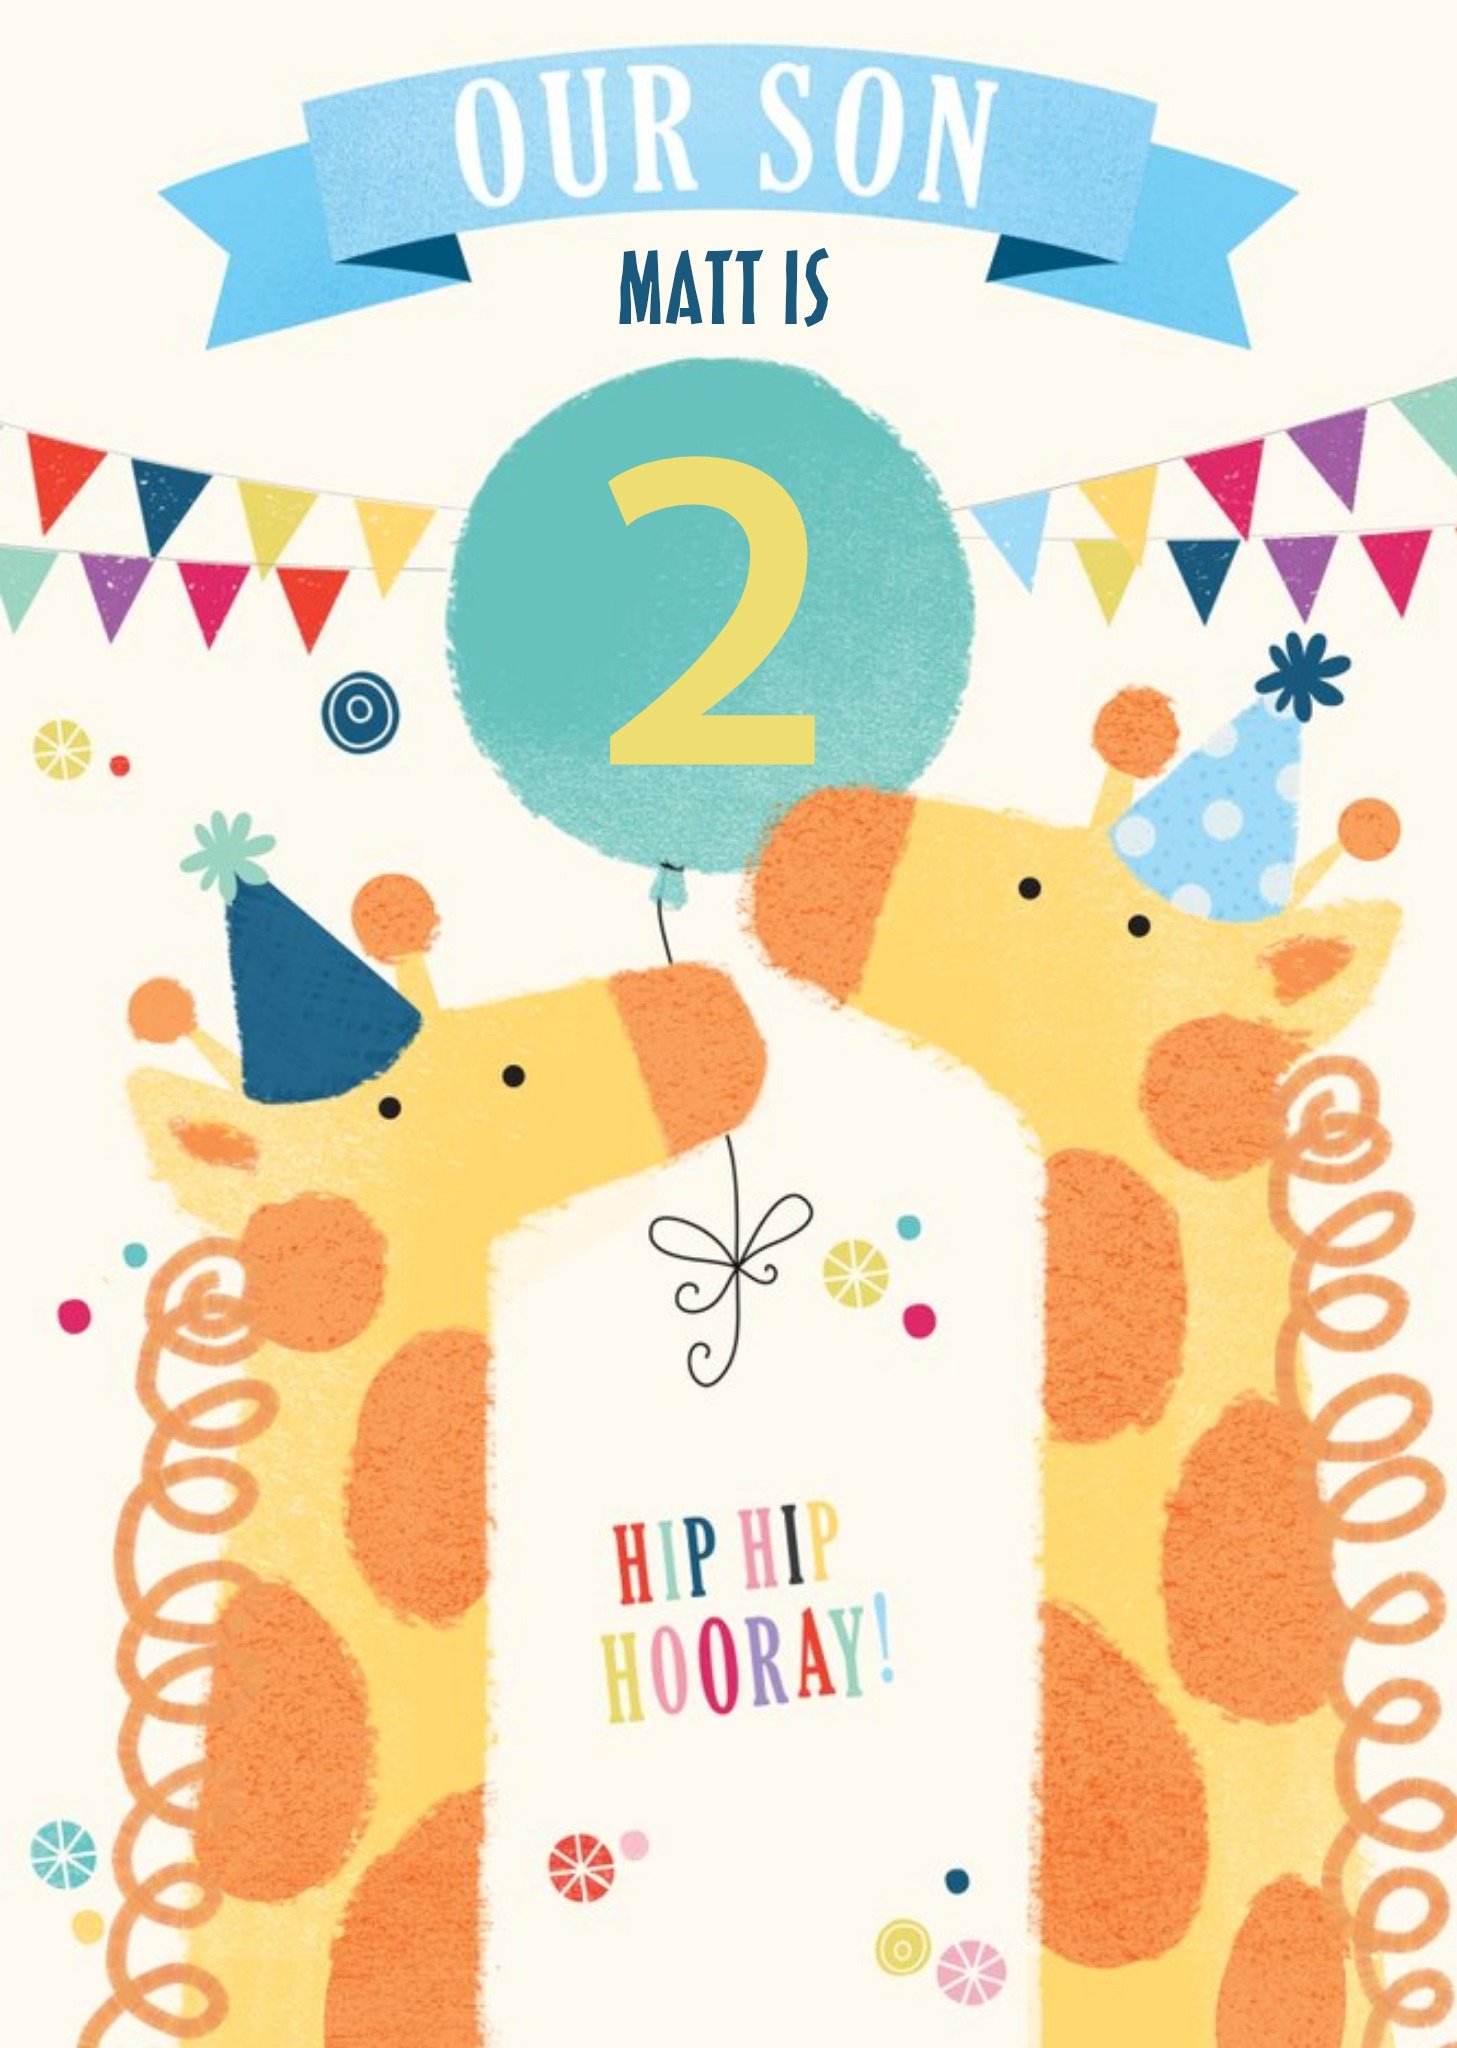 Moonpig Illustration Of Giraffes In Party Hats With A Balloon And Buntings Son's Birthday Card Ecard